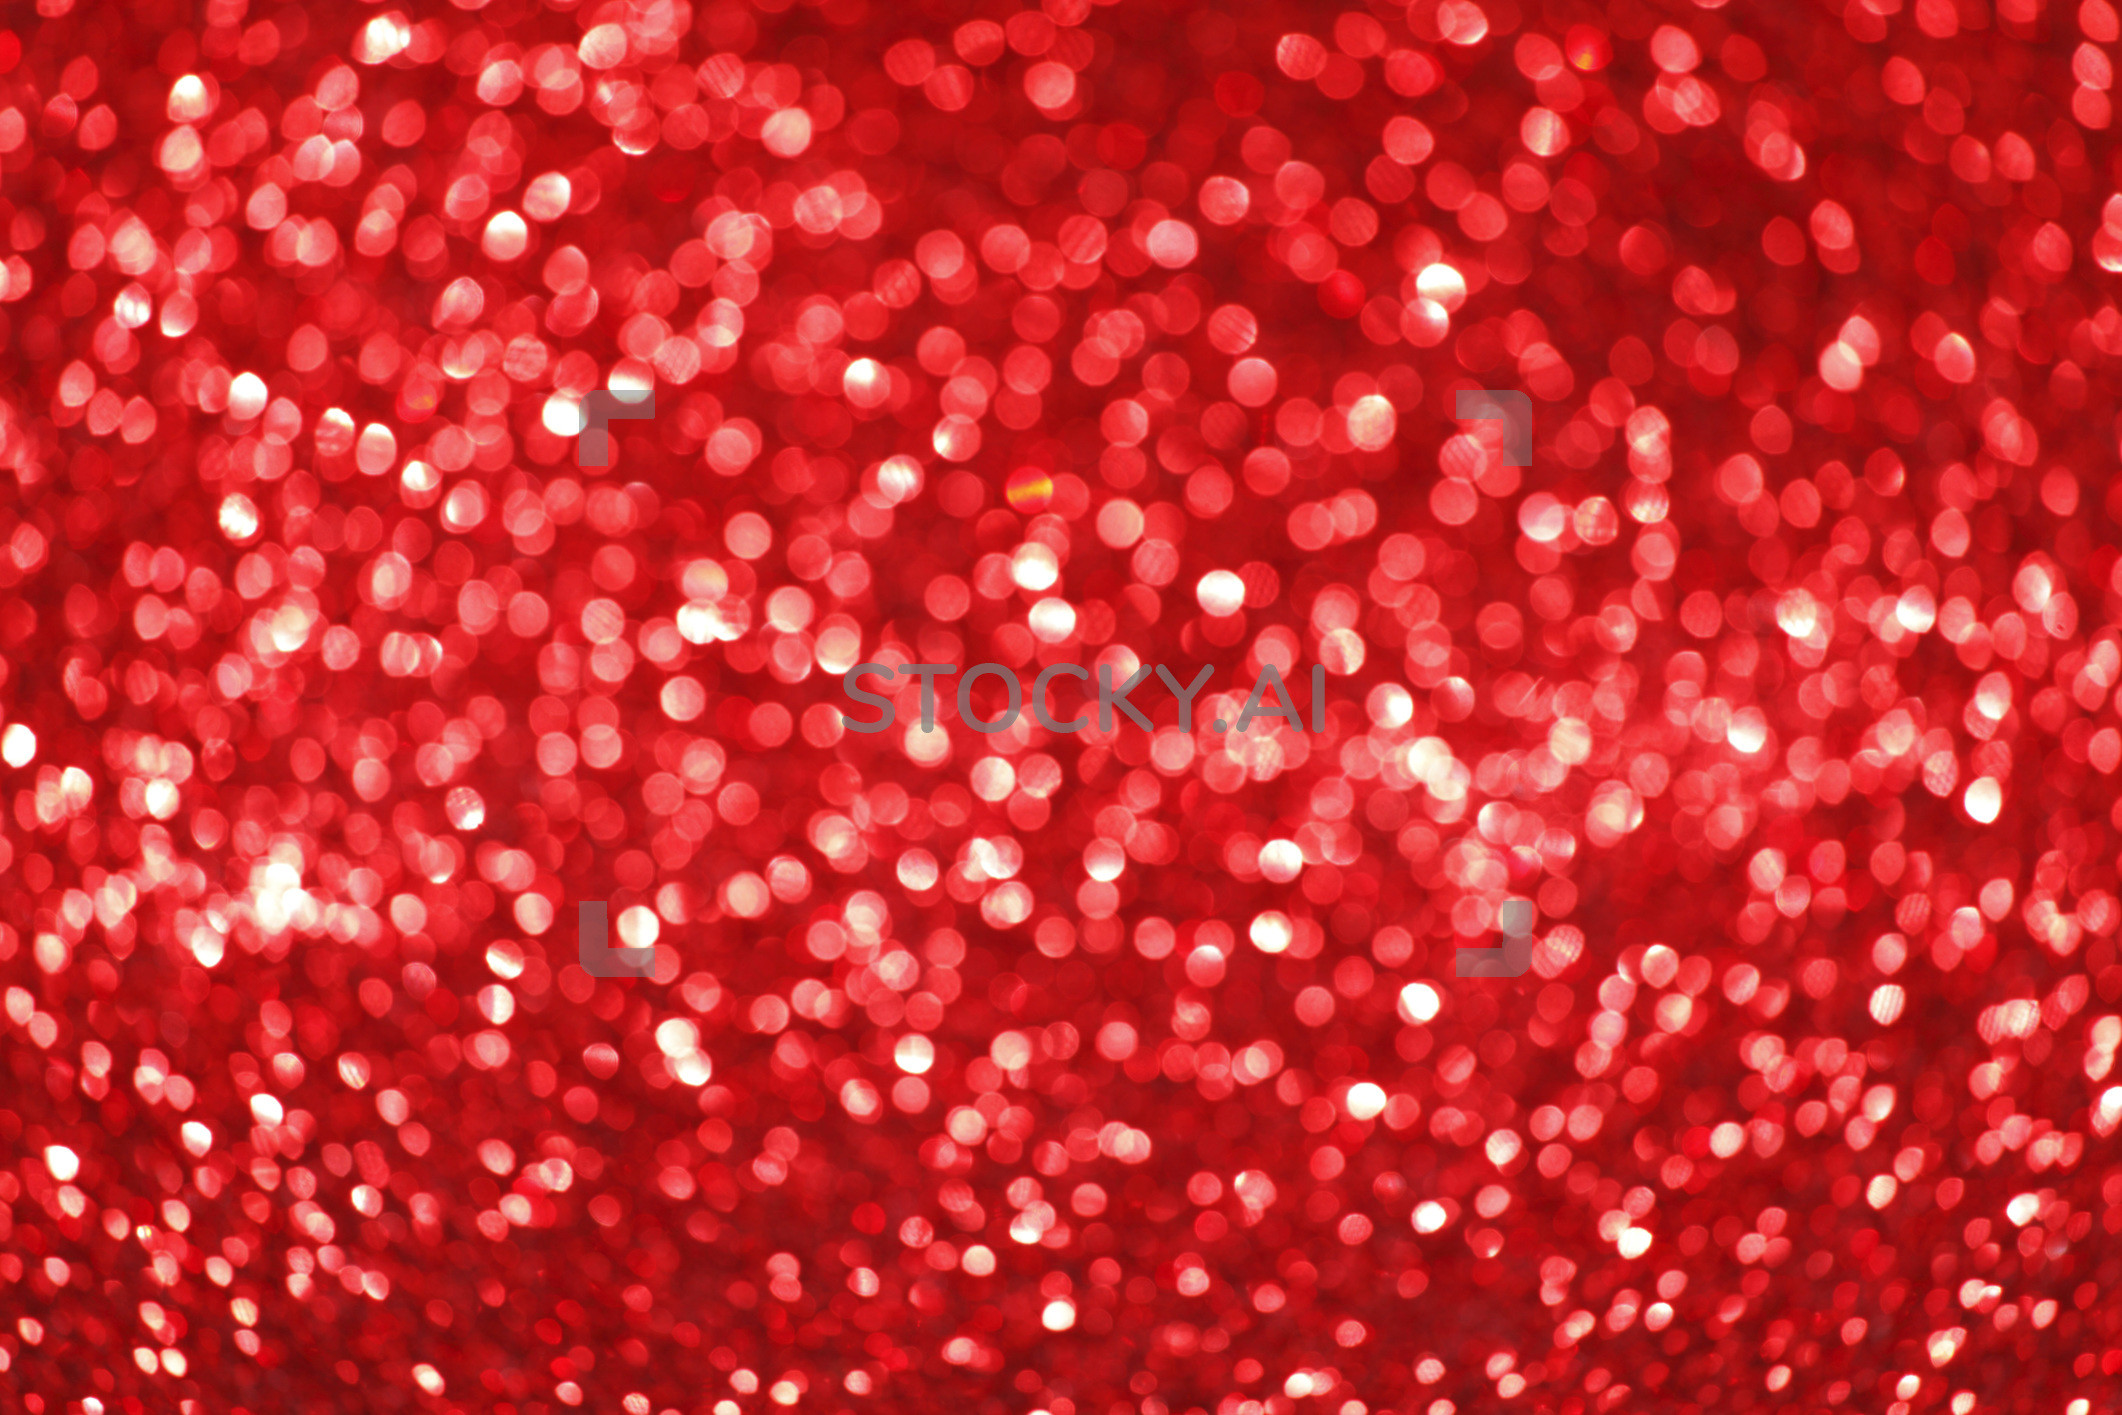 2122x1415 Image of Red glitter background